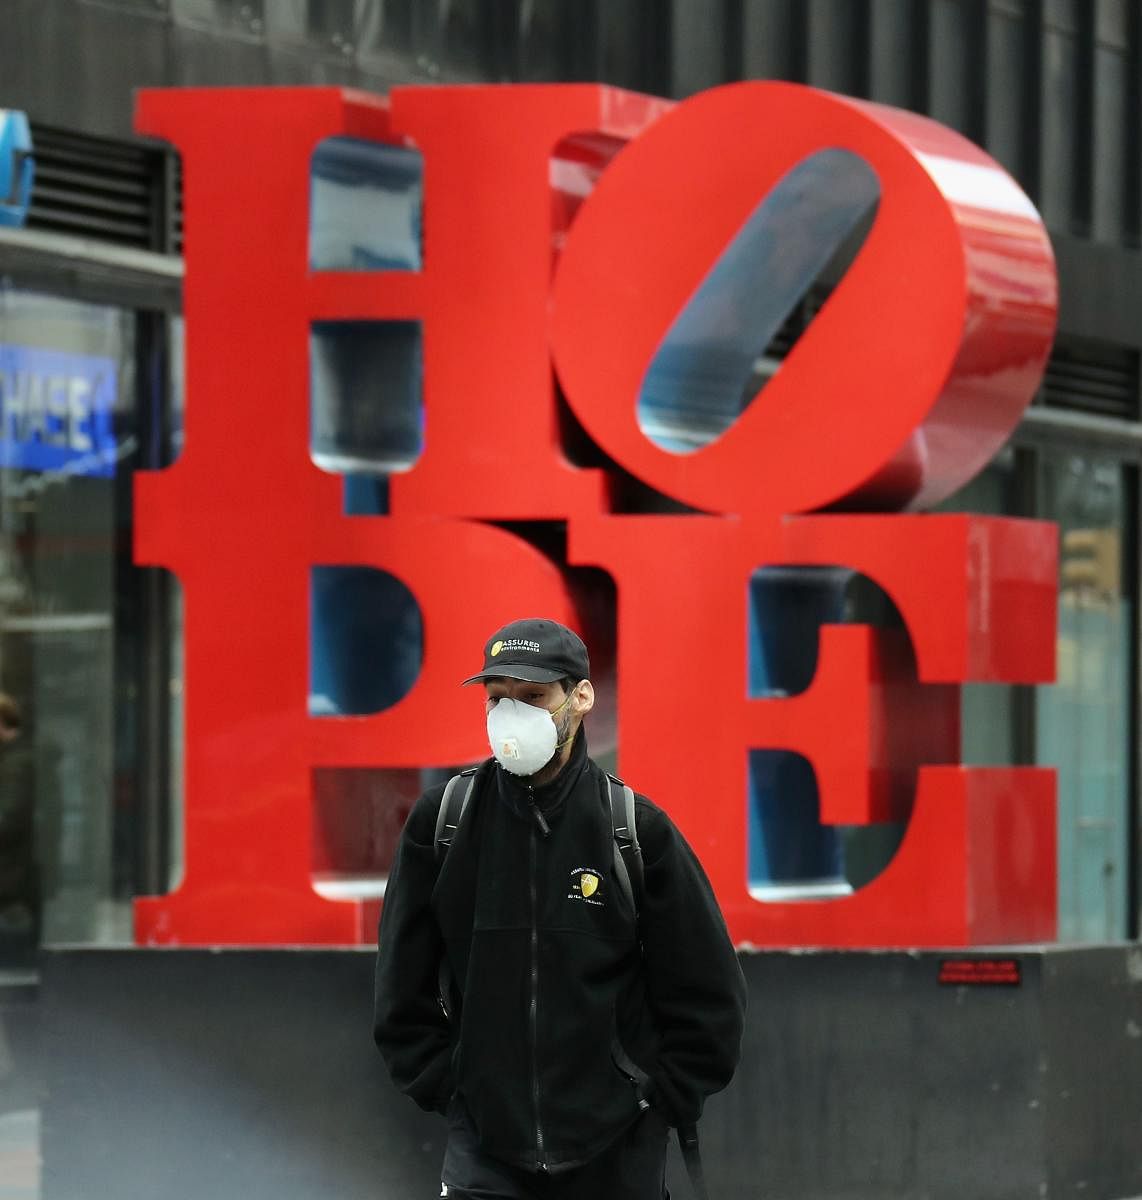 Pedestrians walk past a HOPE sign on 53rd Street and Seventh Avenue on April 02, 2020 in New York City. Currently, over 92,000 people in New York state have tested positive for COVID-19. (Getty Images/AFP)